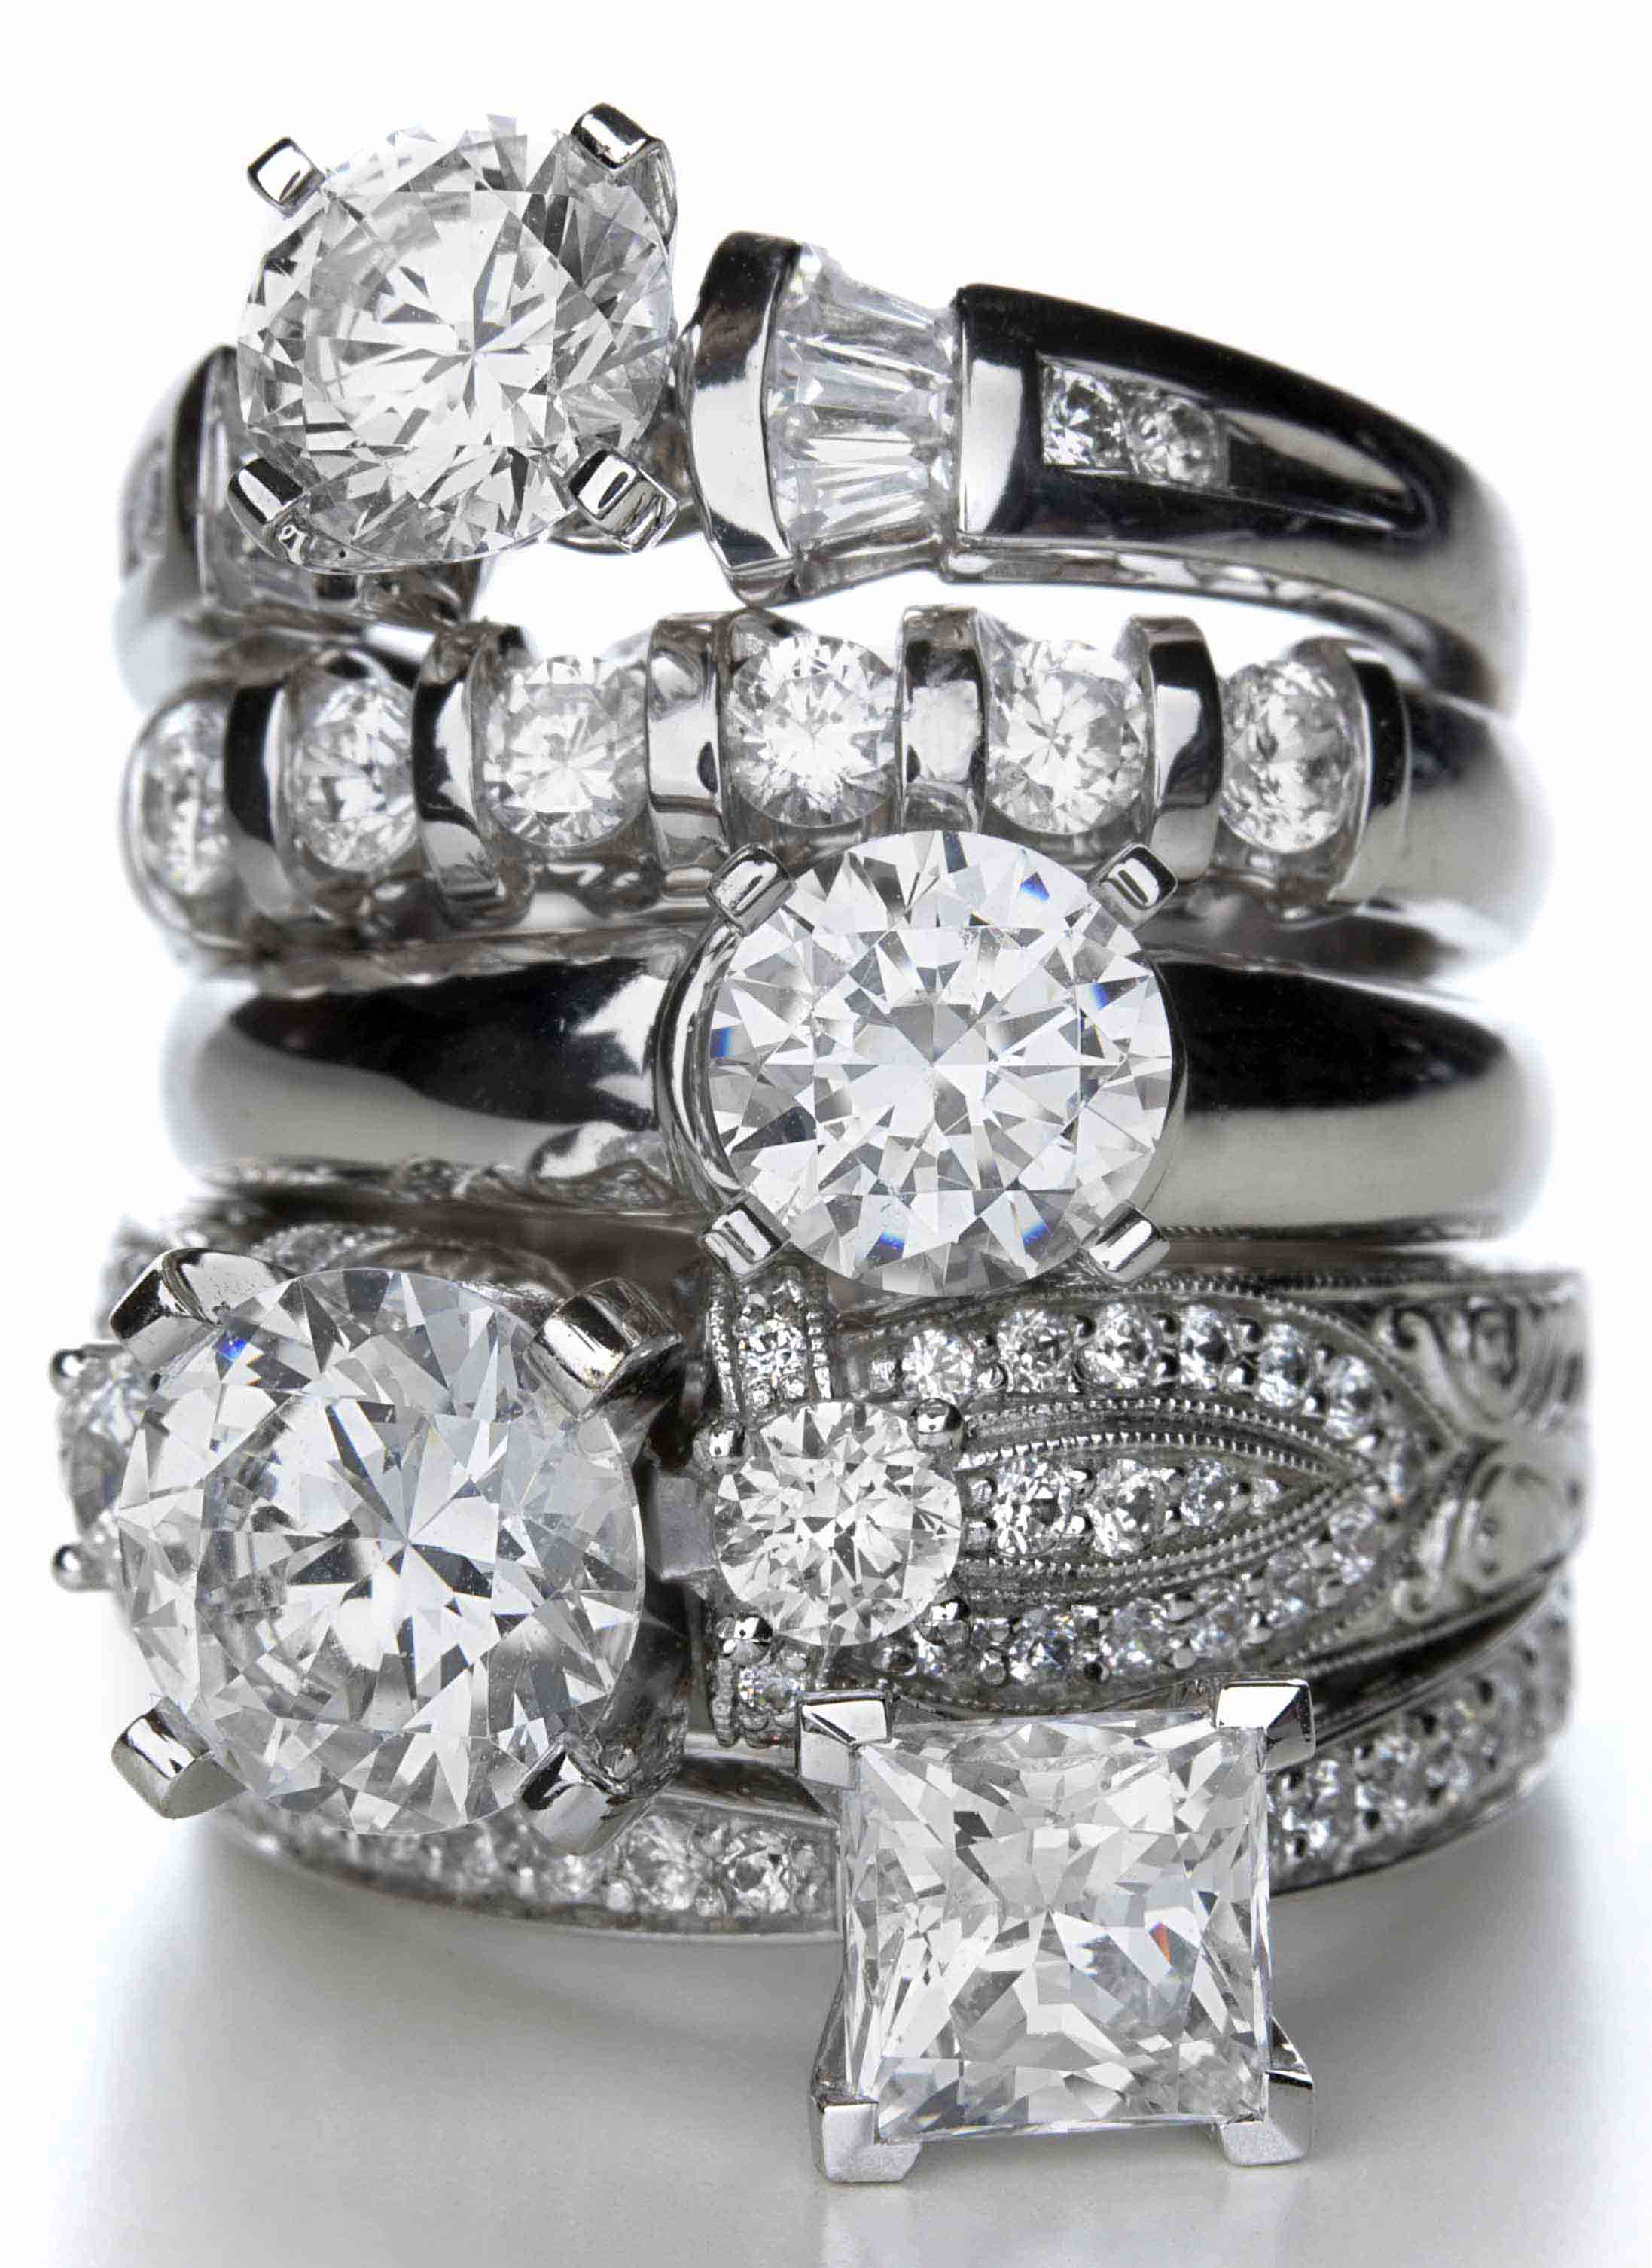 The Top 5 On-Line Diamond Engagement Ring Websites